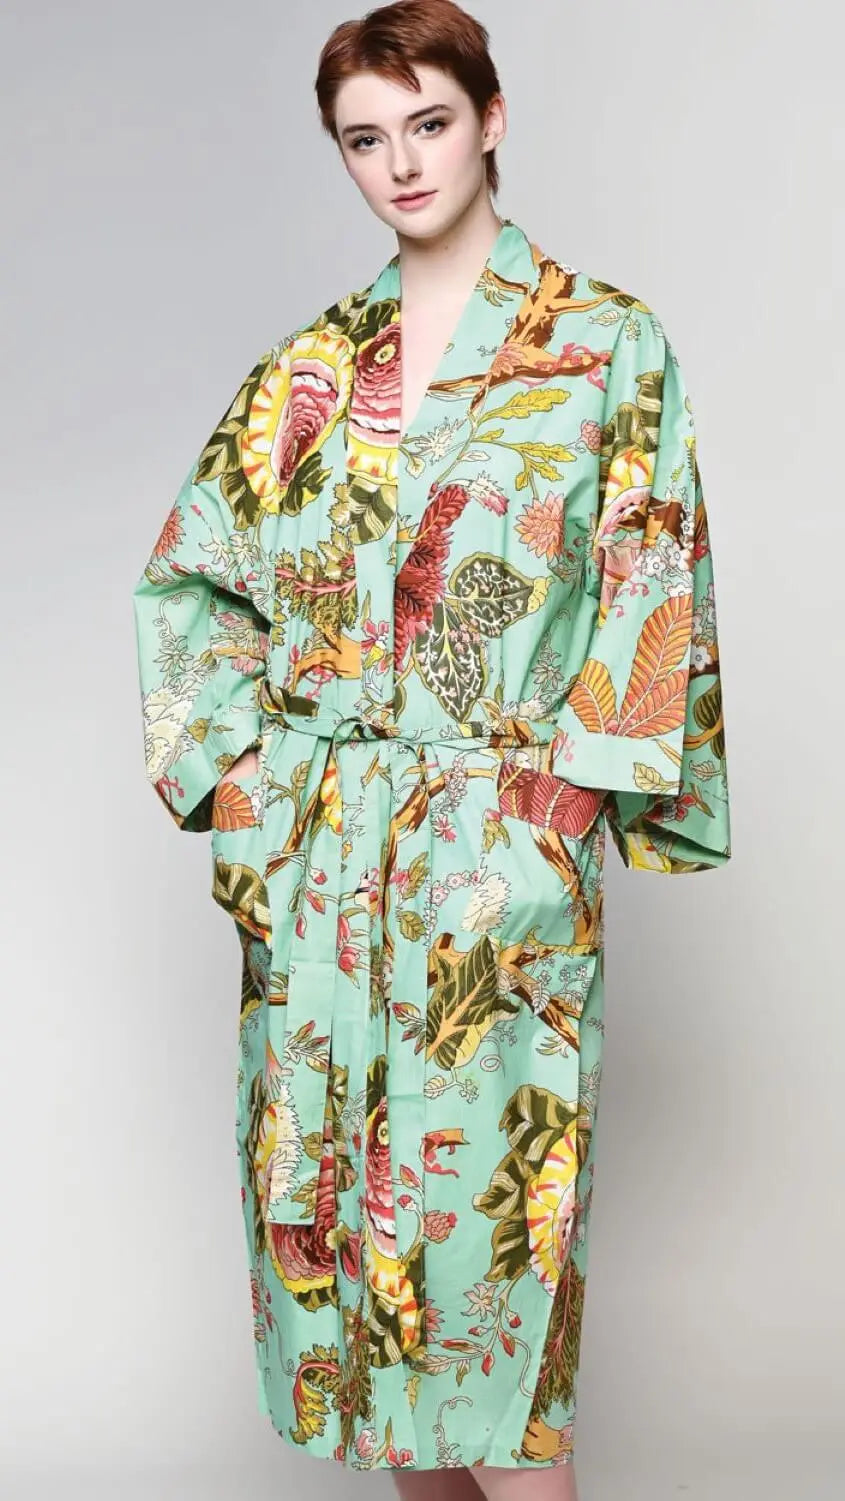 Cotton Kimono Robe in Seafoam Green Floral with Long Sleeves and Pockets